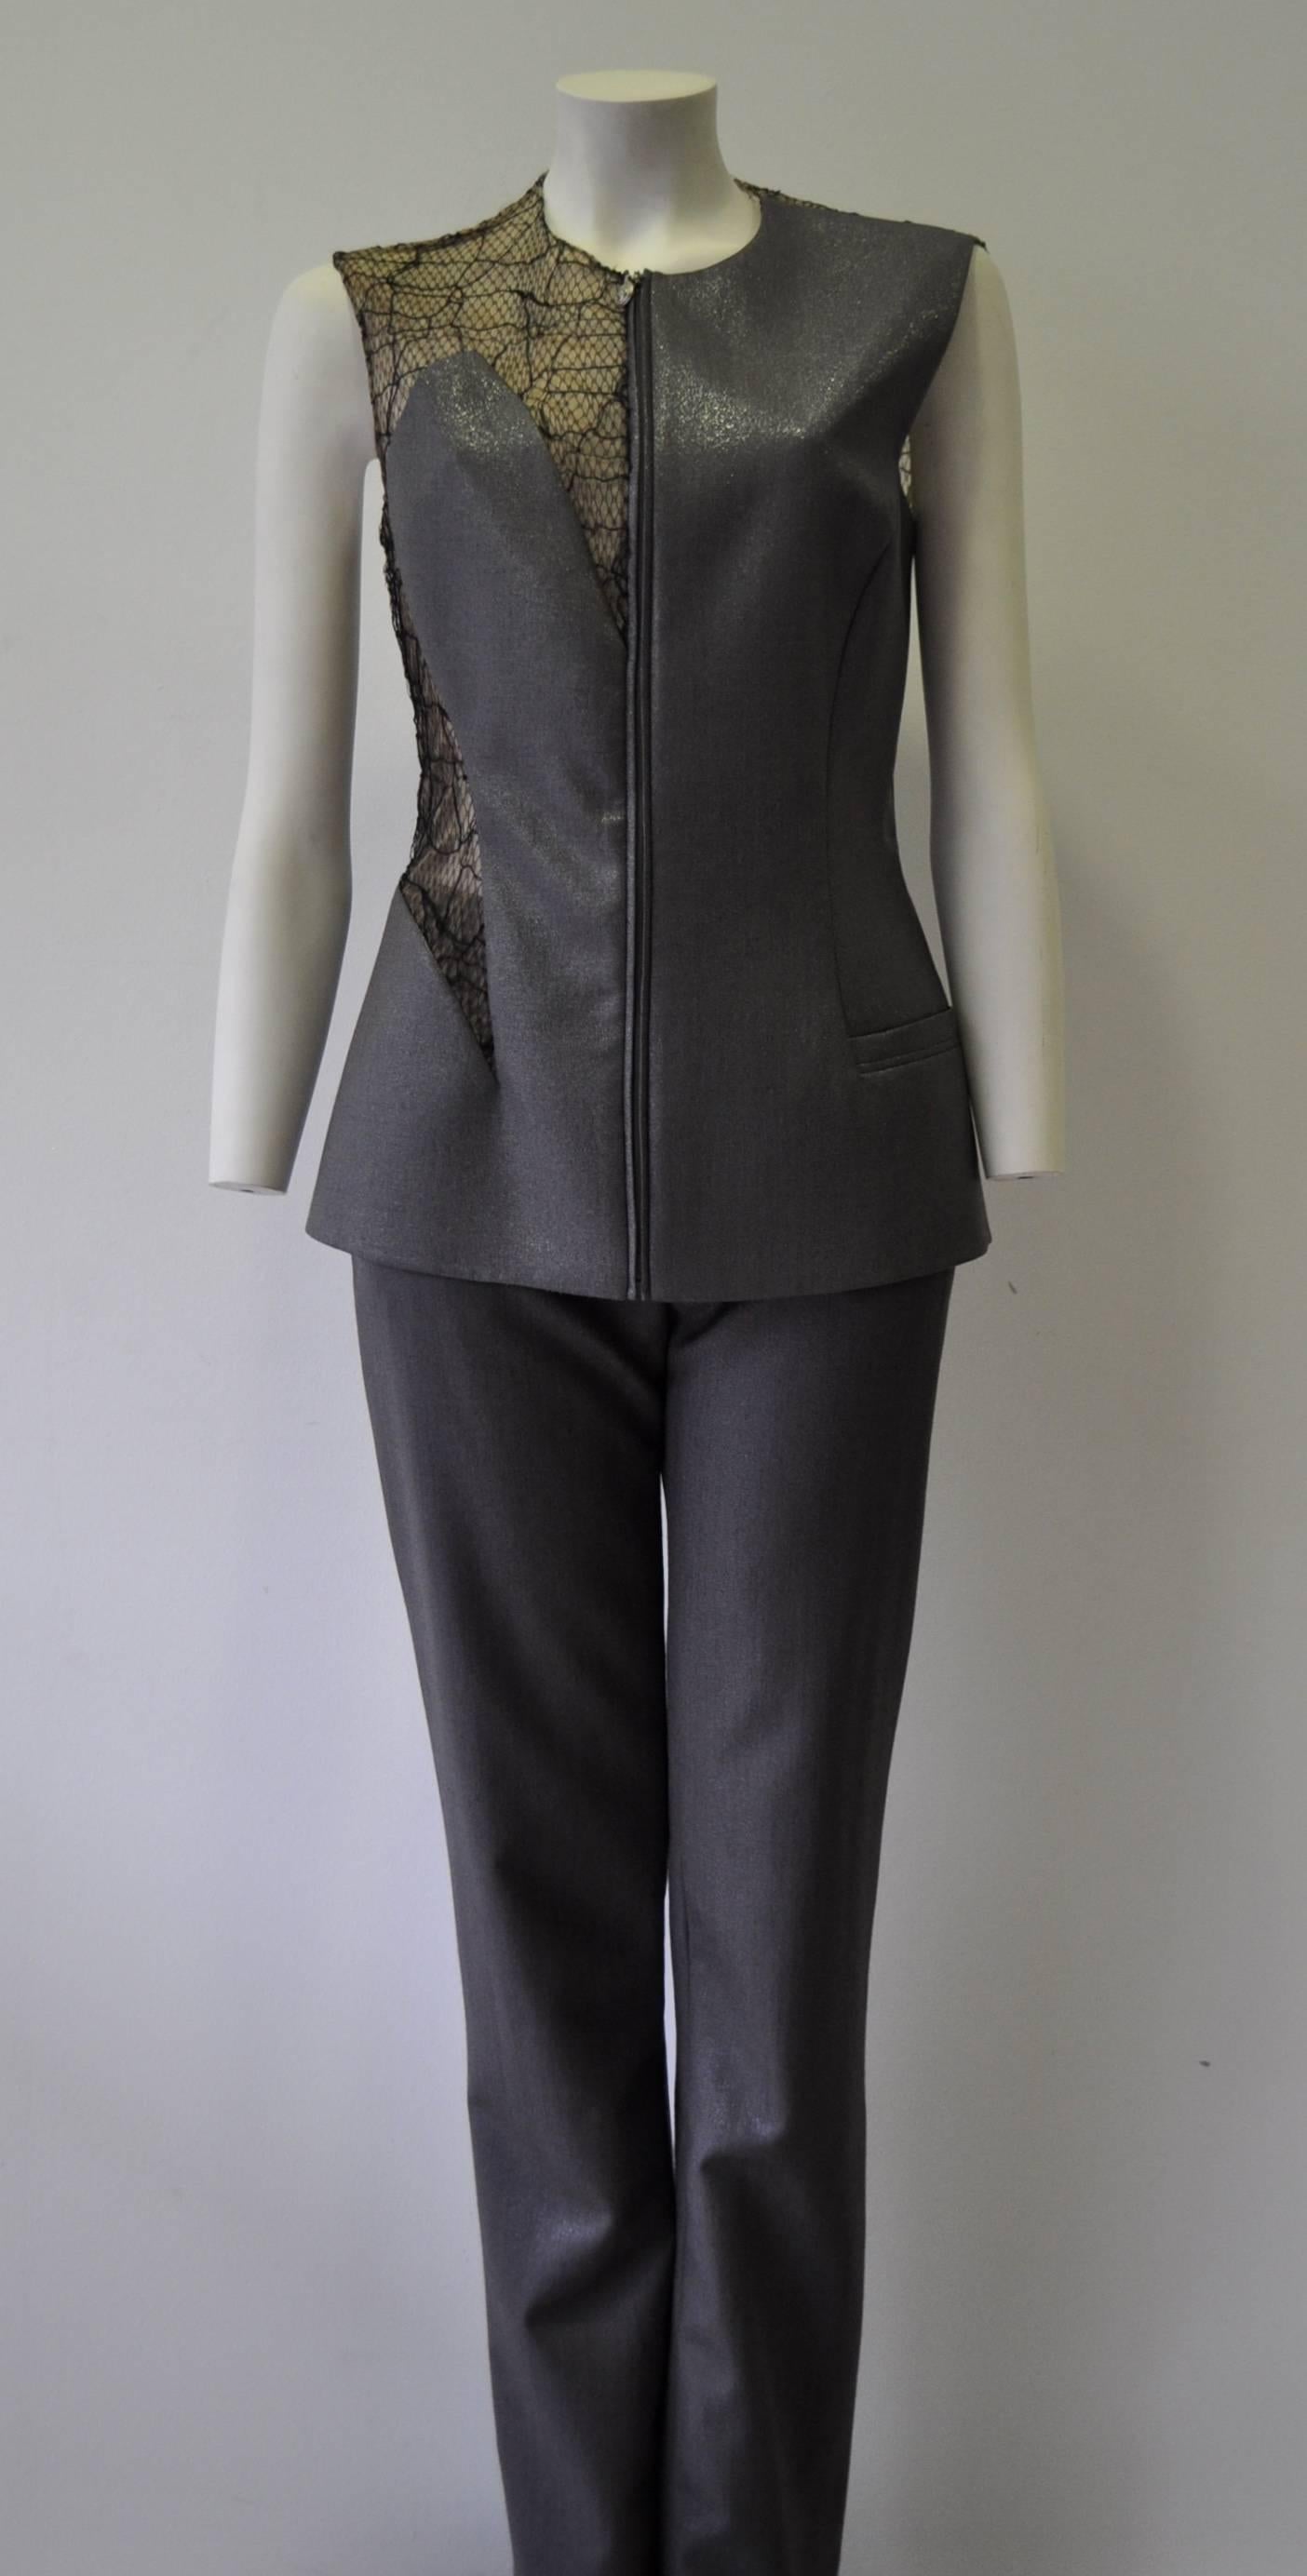 Gianni Versace Couture Grey Metallic Mesh Aplique Vested Pantsuit with Mini Medusa Front Zipper Pull Tag